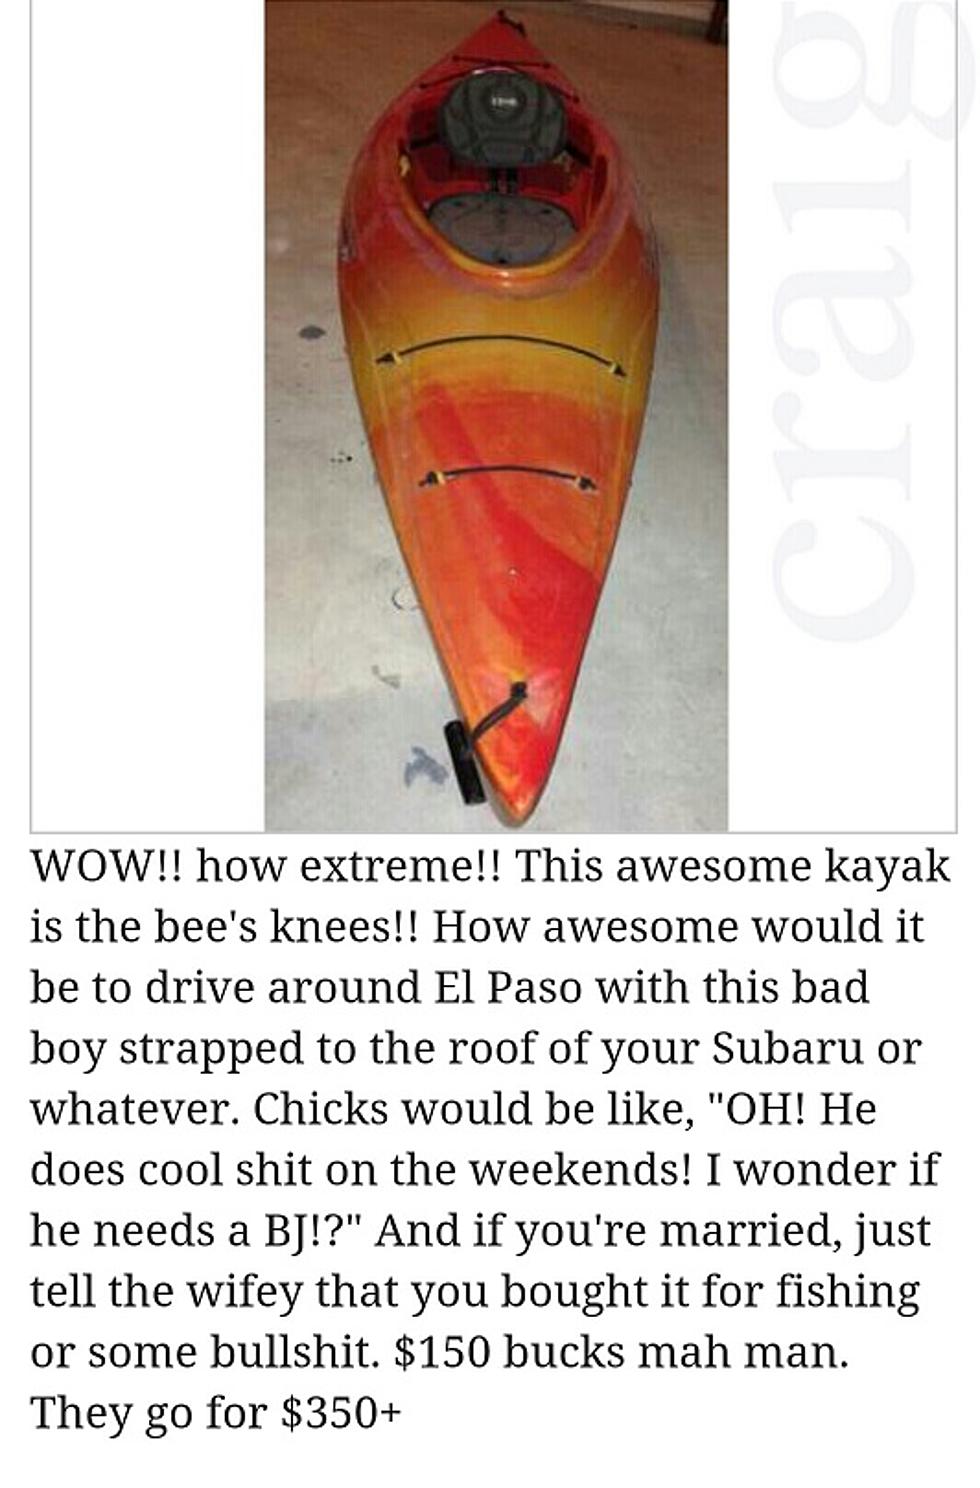 El Paso Tries to Sell Kayak on Craigslist with Hilarious Description